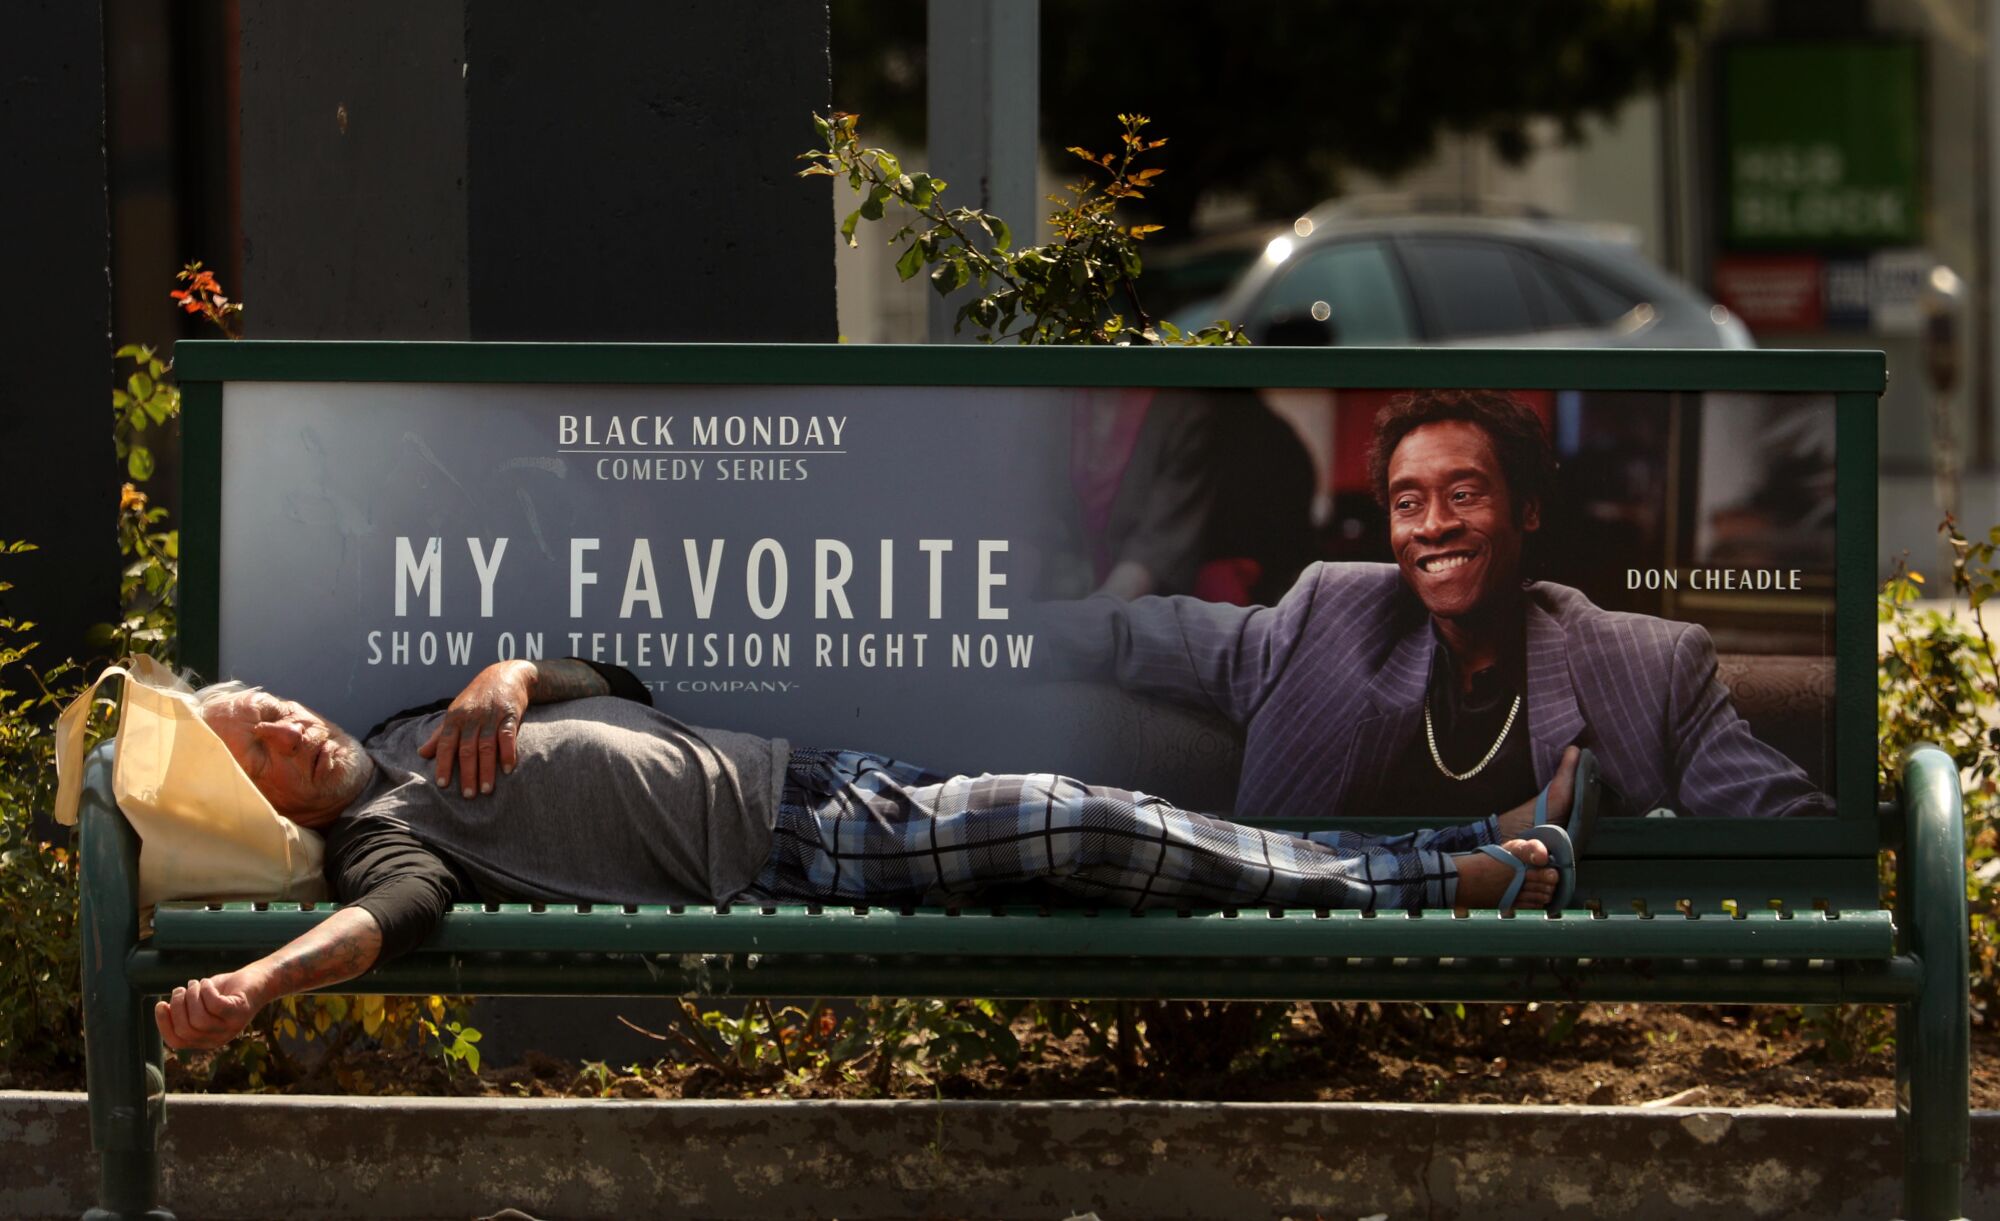 A homeless man by the name of Loren, sleeps on a bench under the watchful eye of actor Don Cheadle in East Hollywood